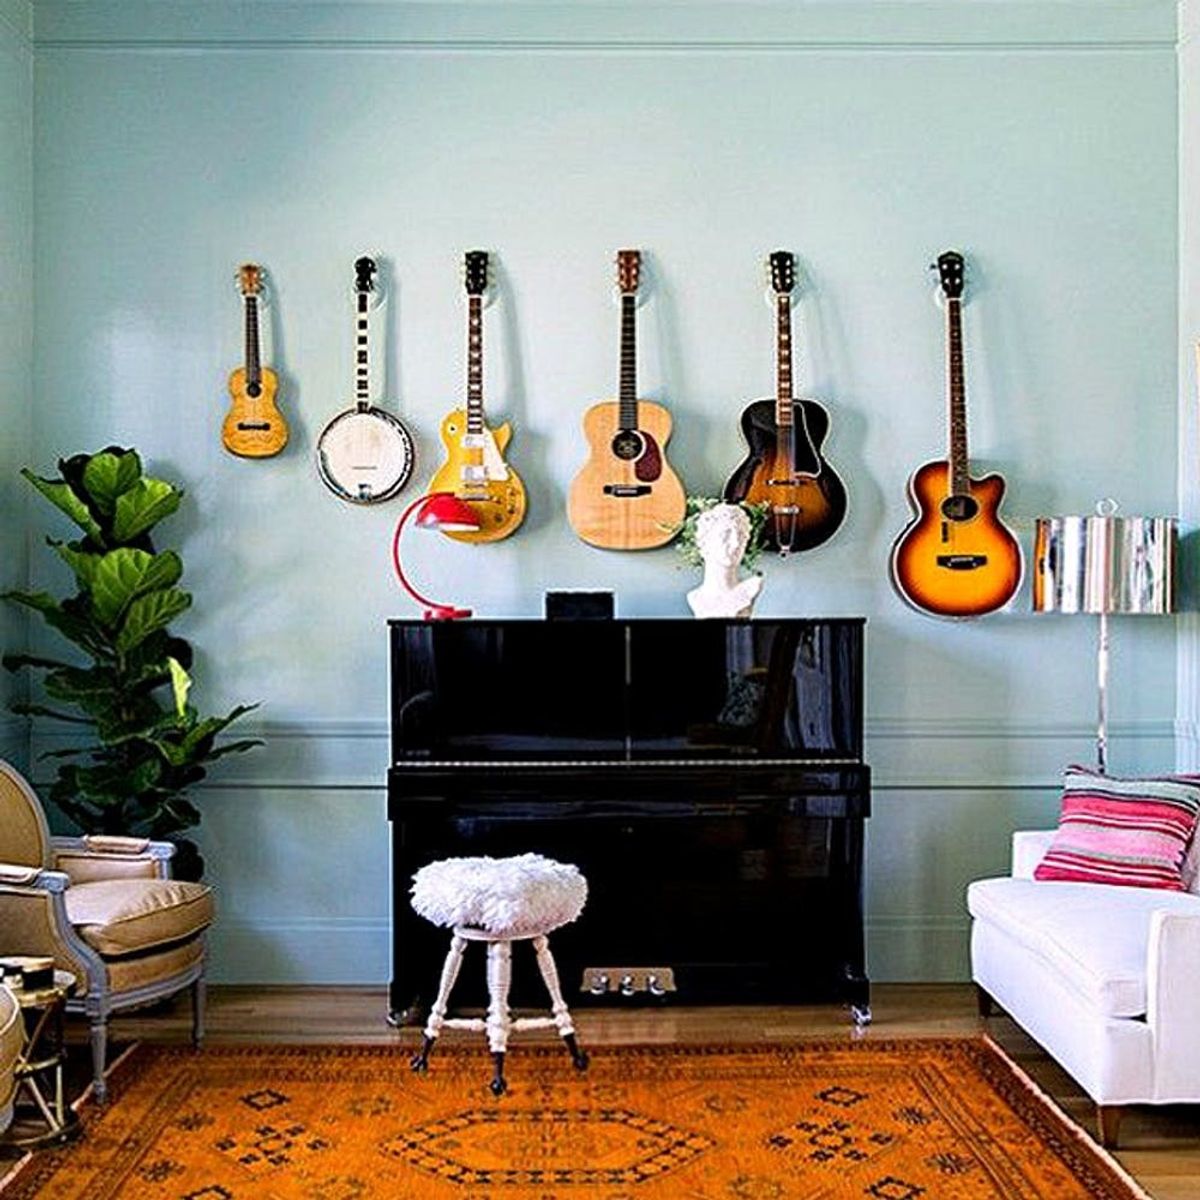 10 Ways to Decorate With Guitars That Would Make Taylor Swift Proud